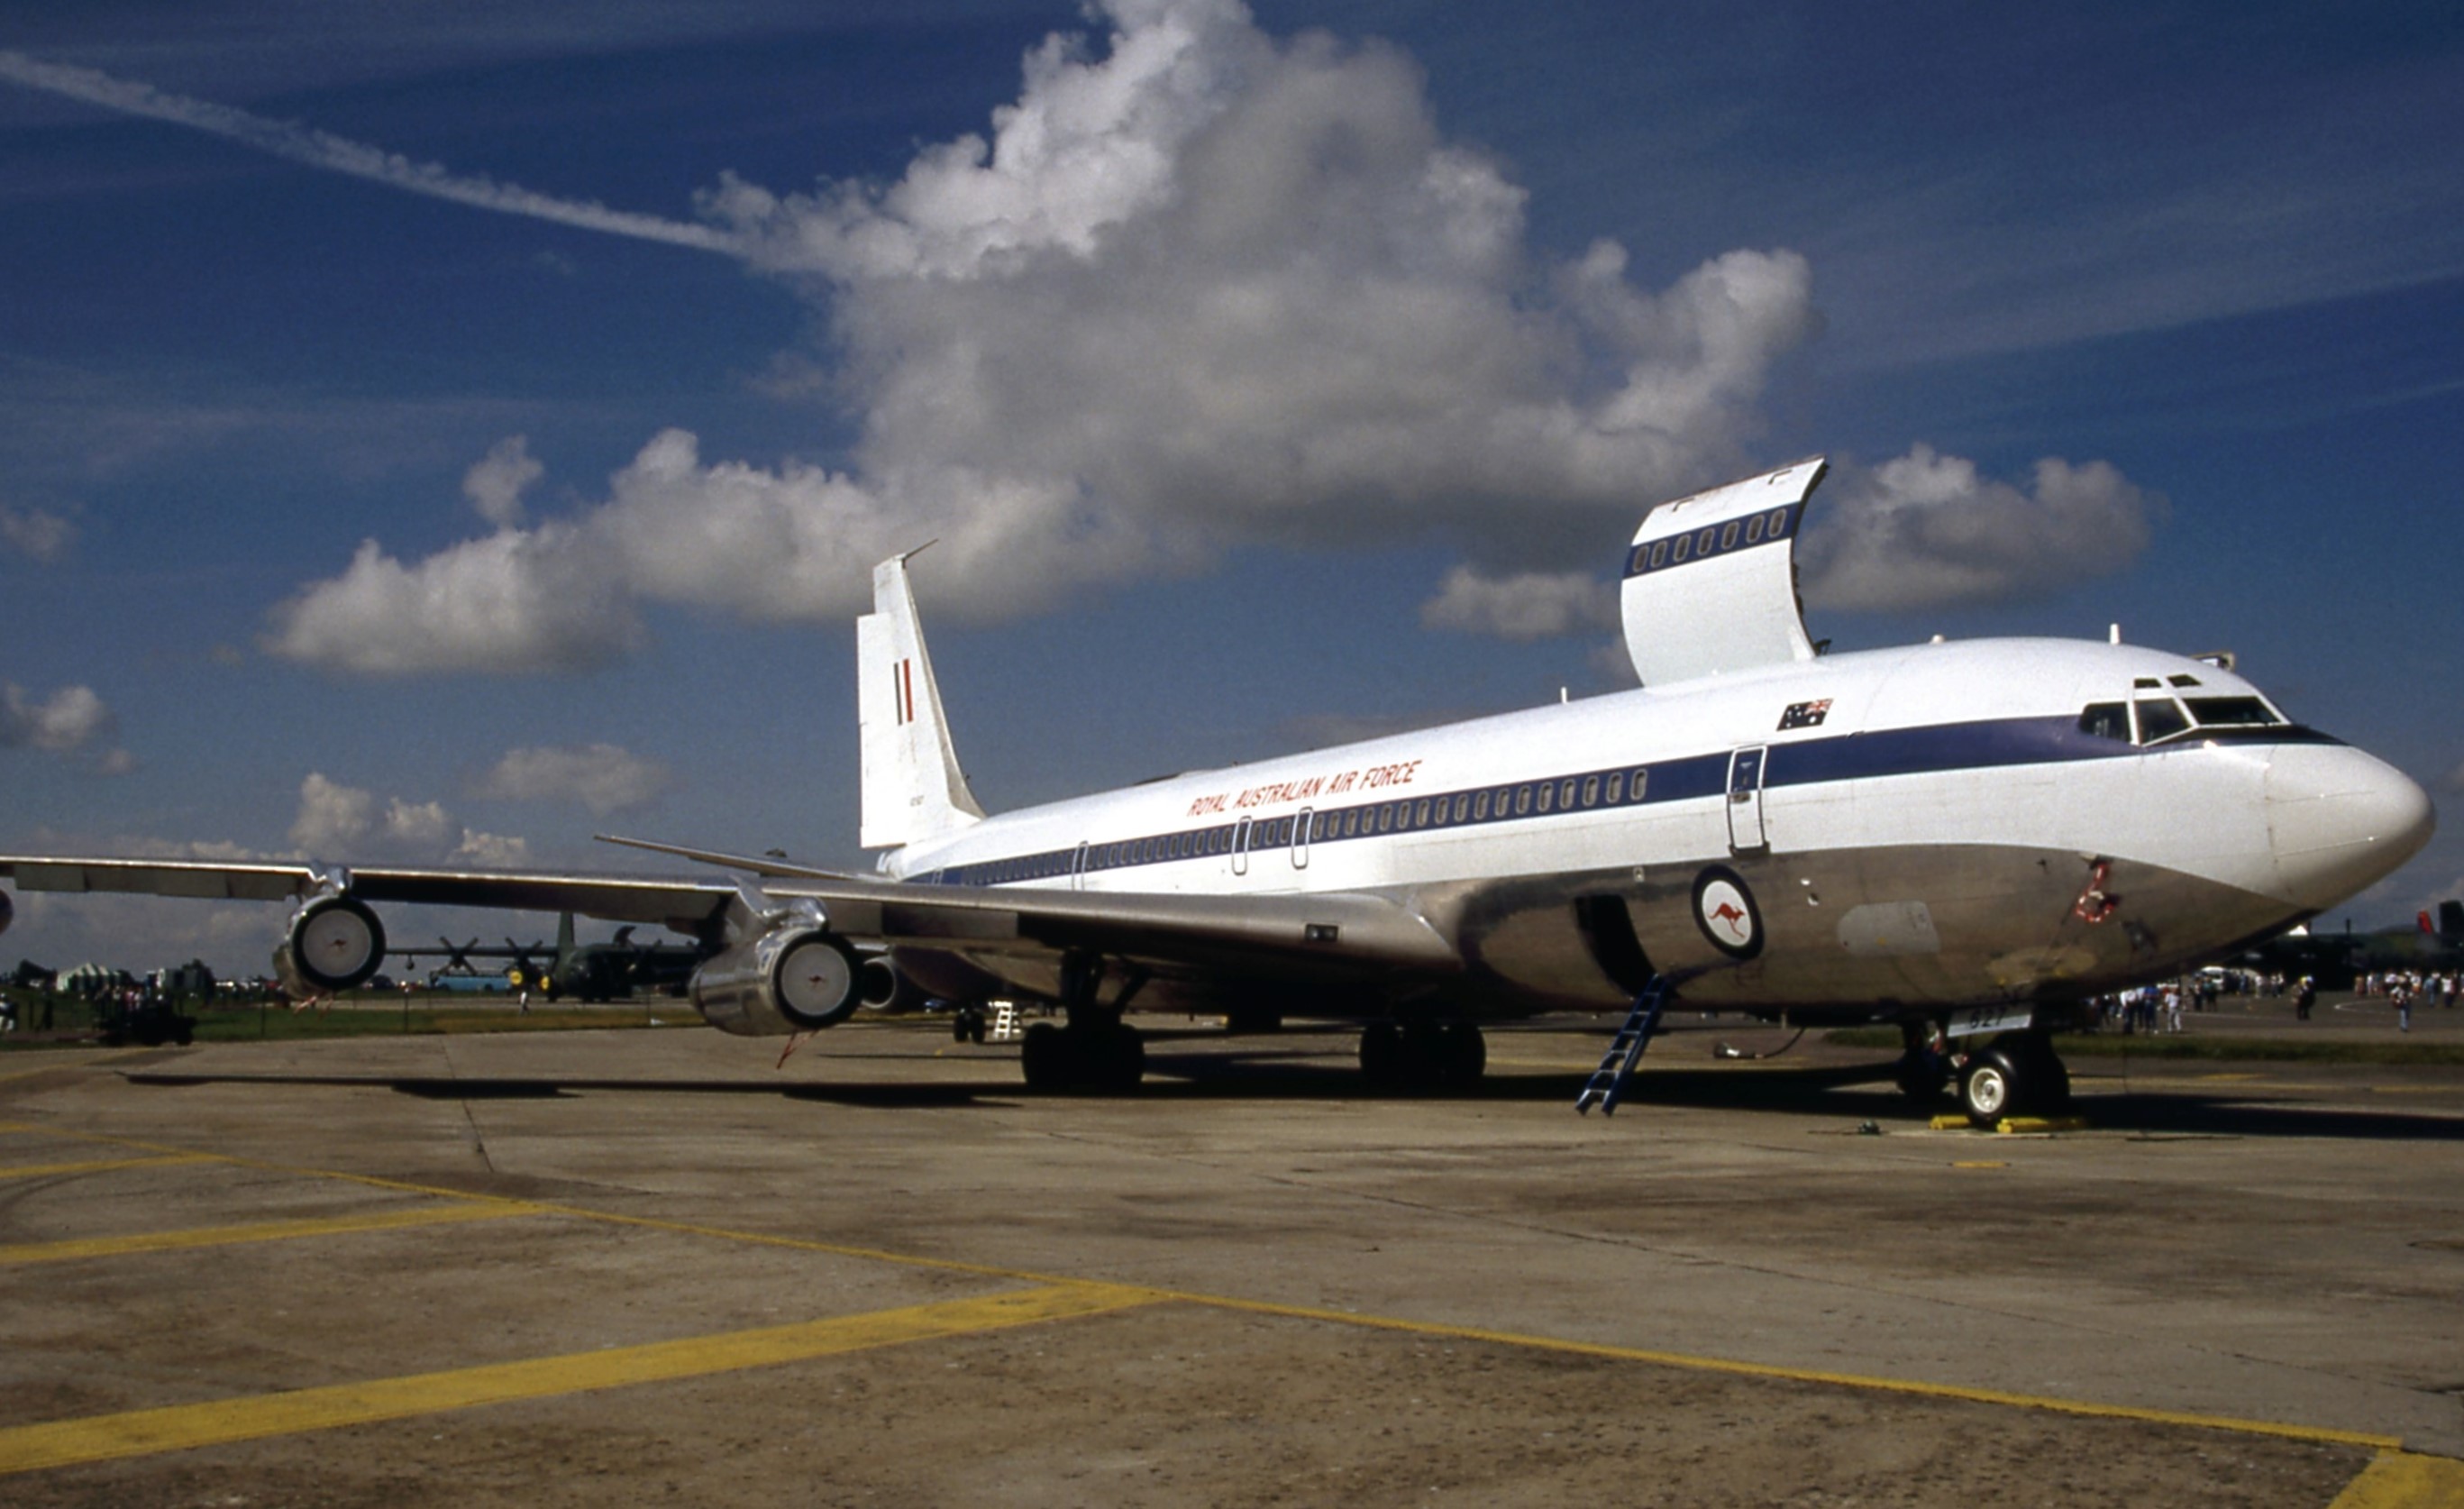 A20-627/A20627 Australian Air Force Boeing 707 Airframe Information - AVSpotters.com